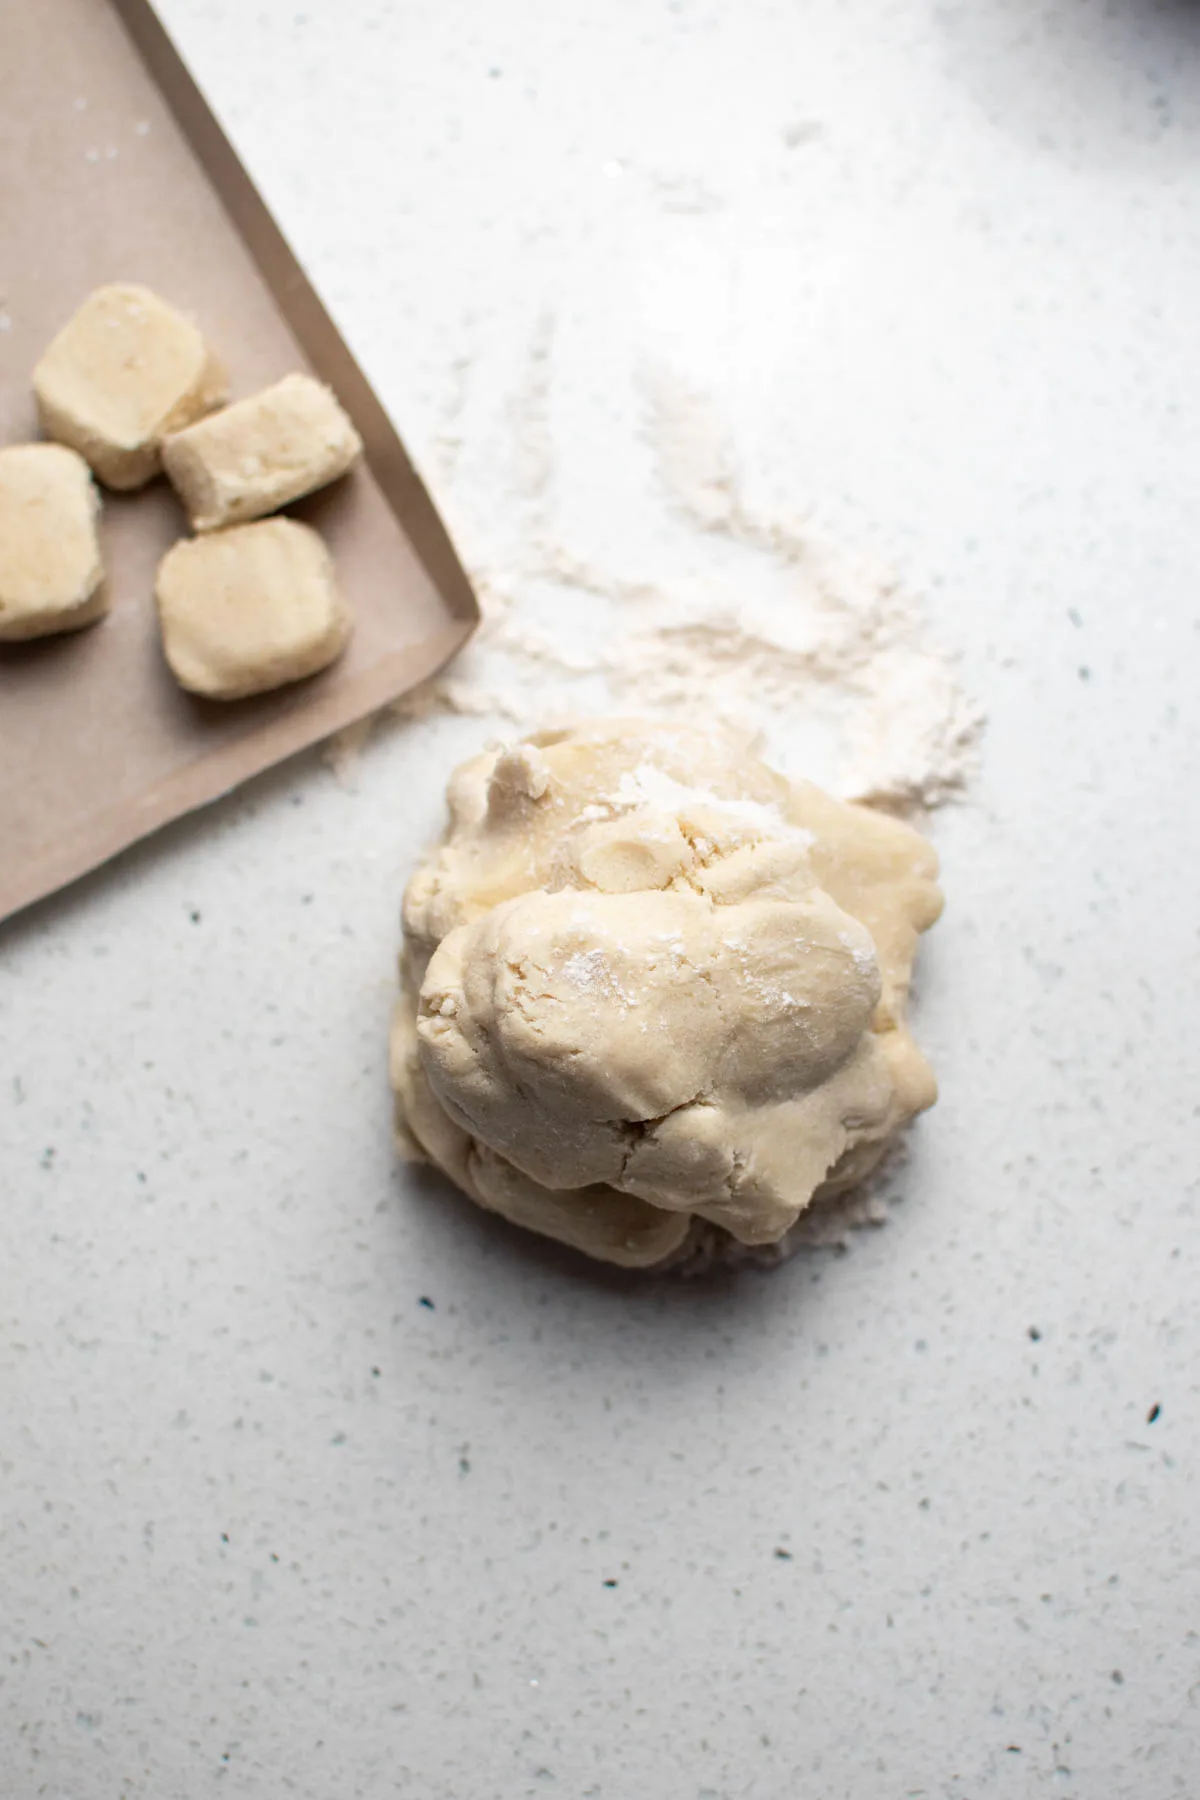 Large ball of sugar cookie dough and sprinkled flour on counter.